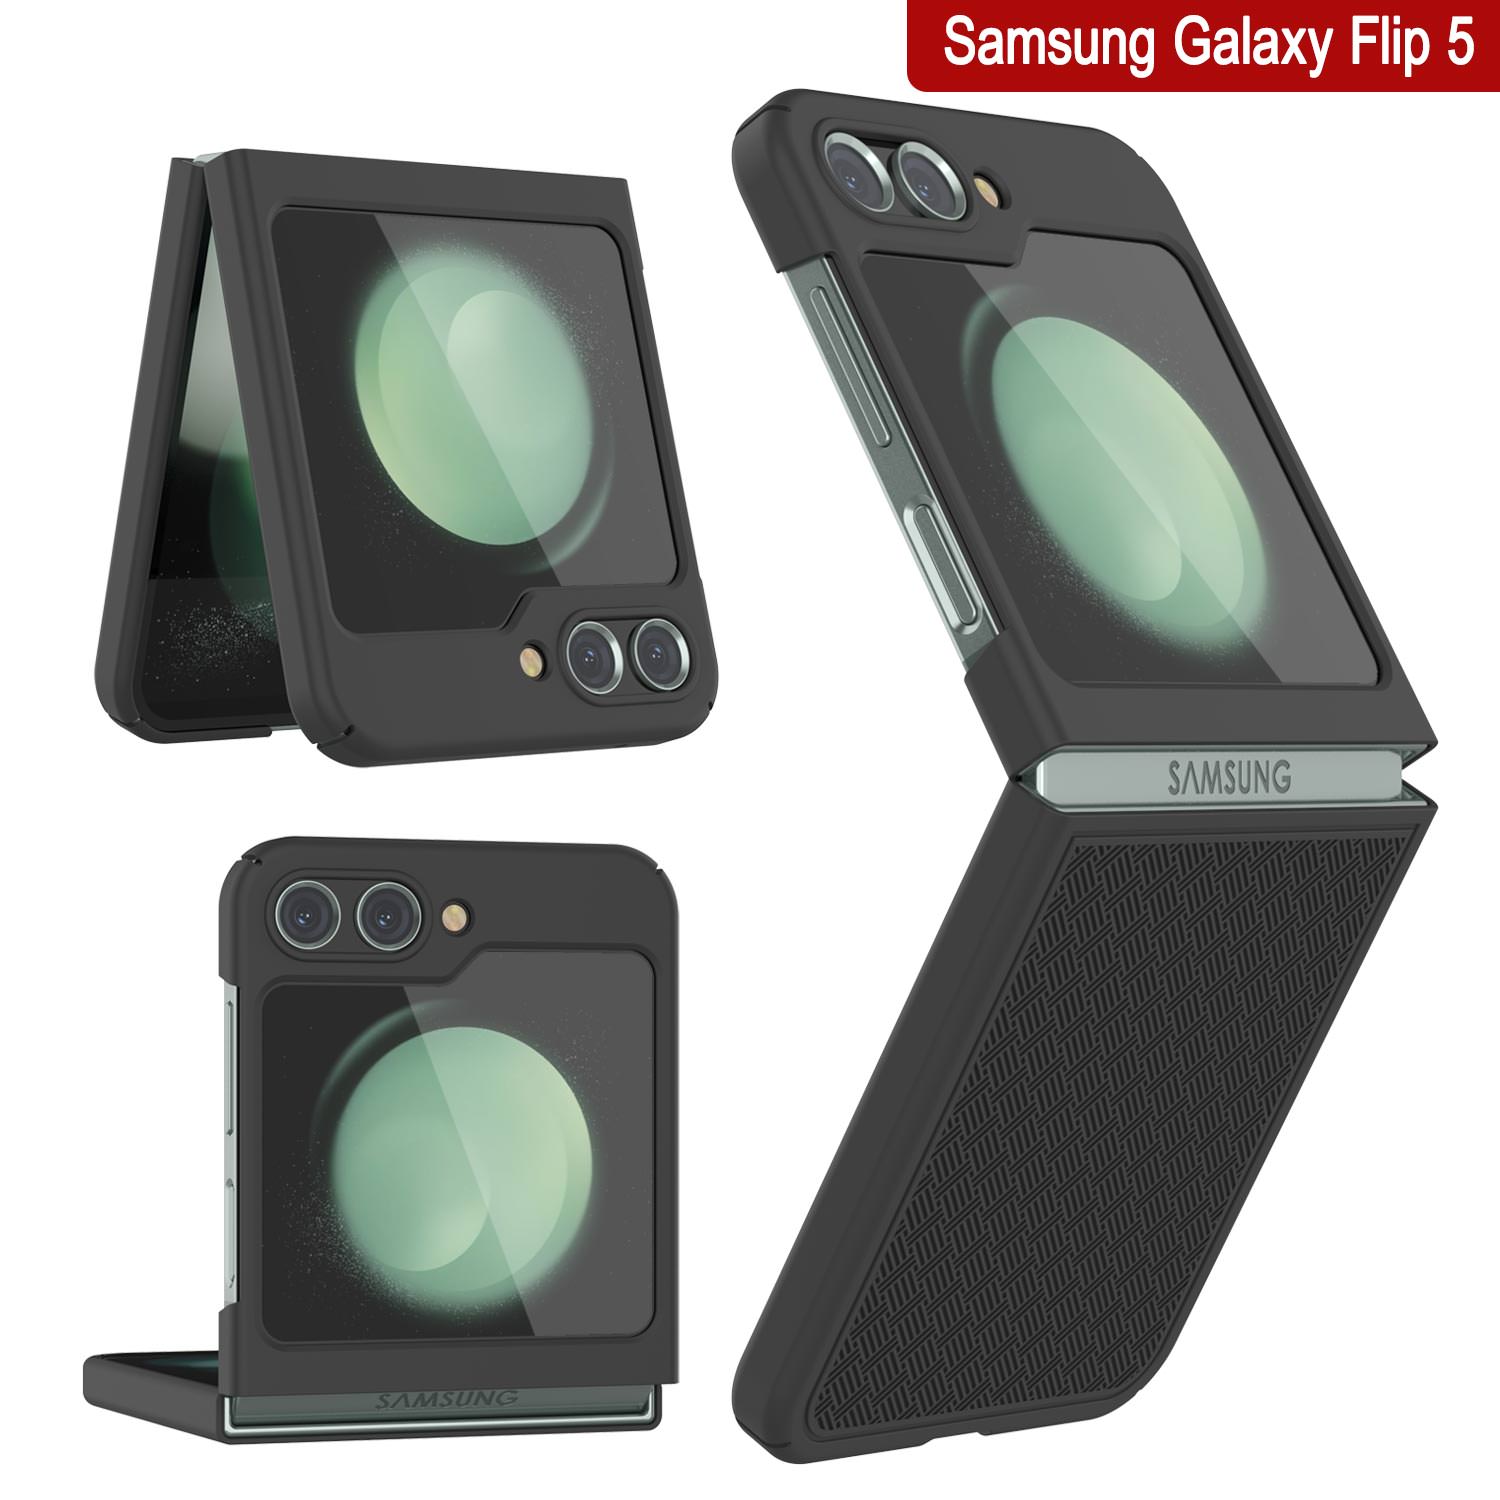 Galaxy Z Flip5 Case With Tempered Glass Screen Protector, Holster Belt Clip & Built-In Kickstand [Black]